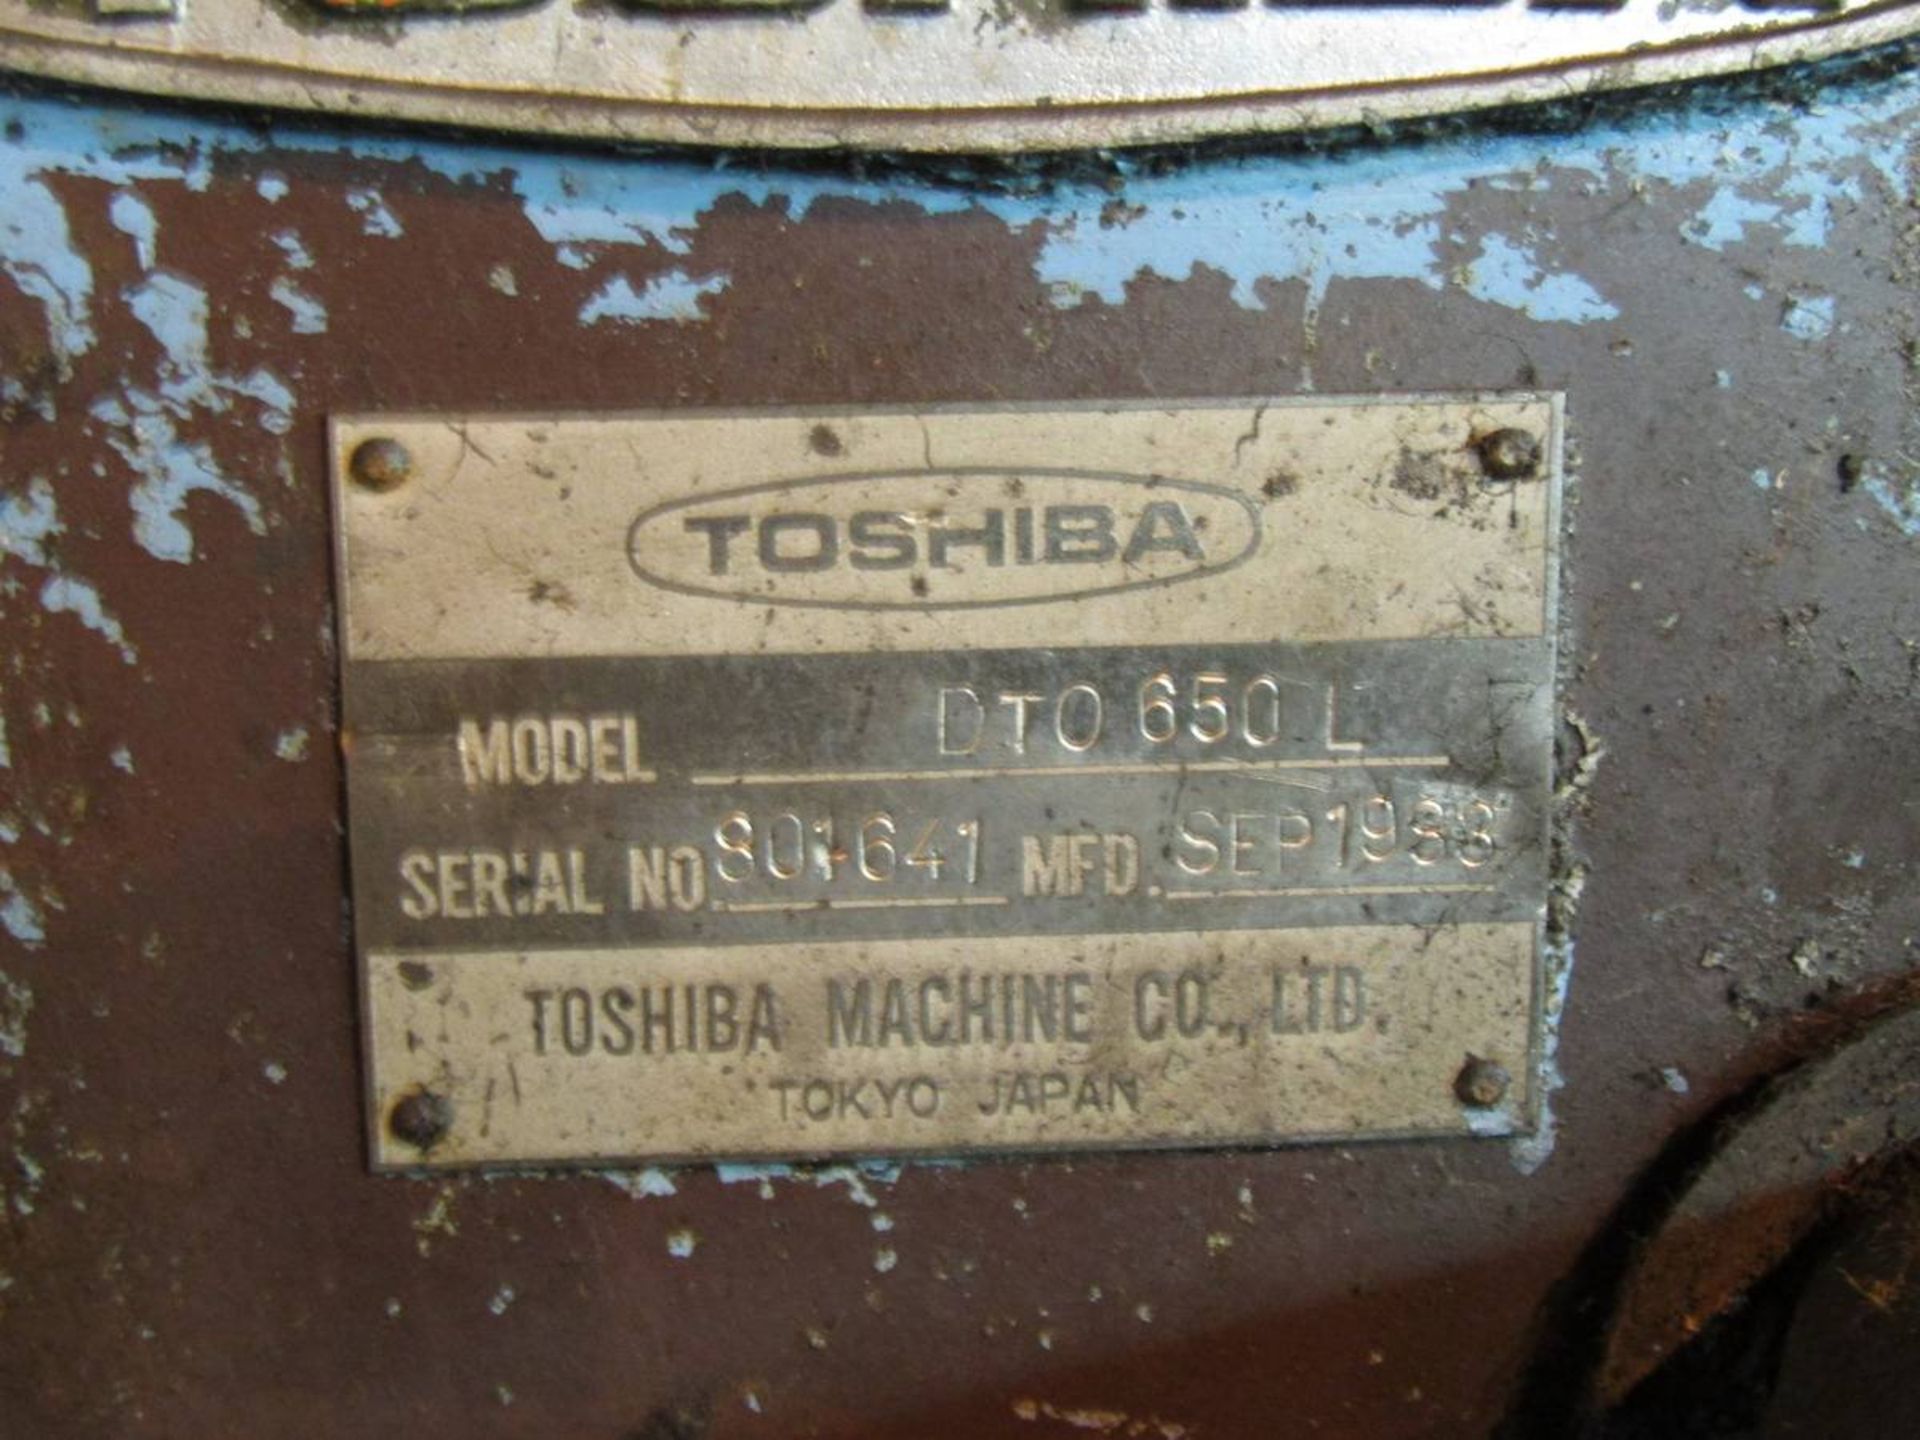 1983 Toshiba DT0650L Hydraulic Material Transfer Arm - Image 5 of 6